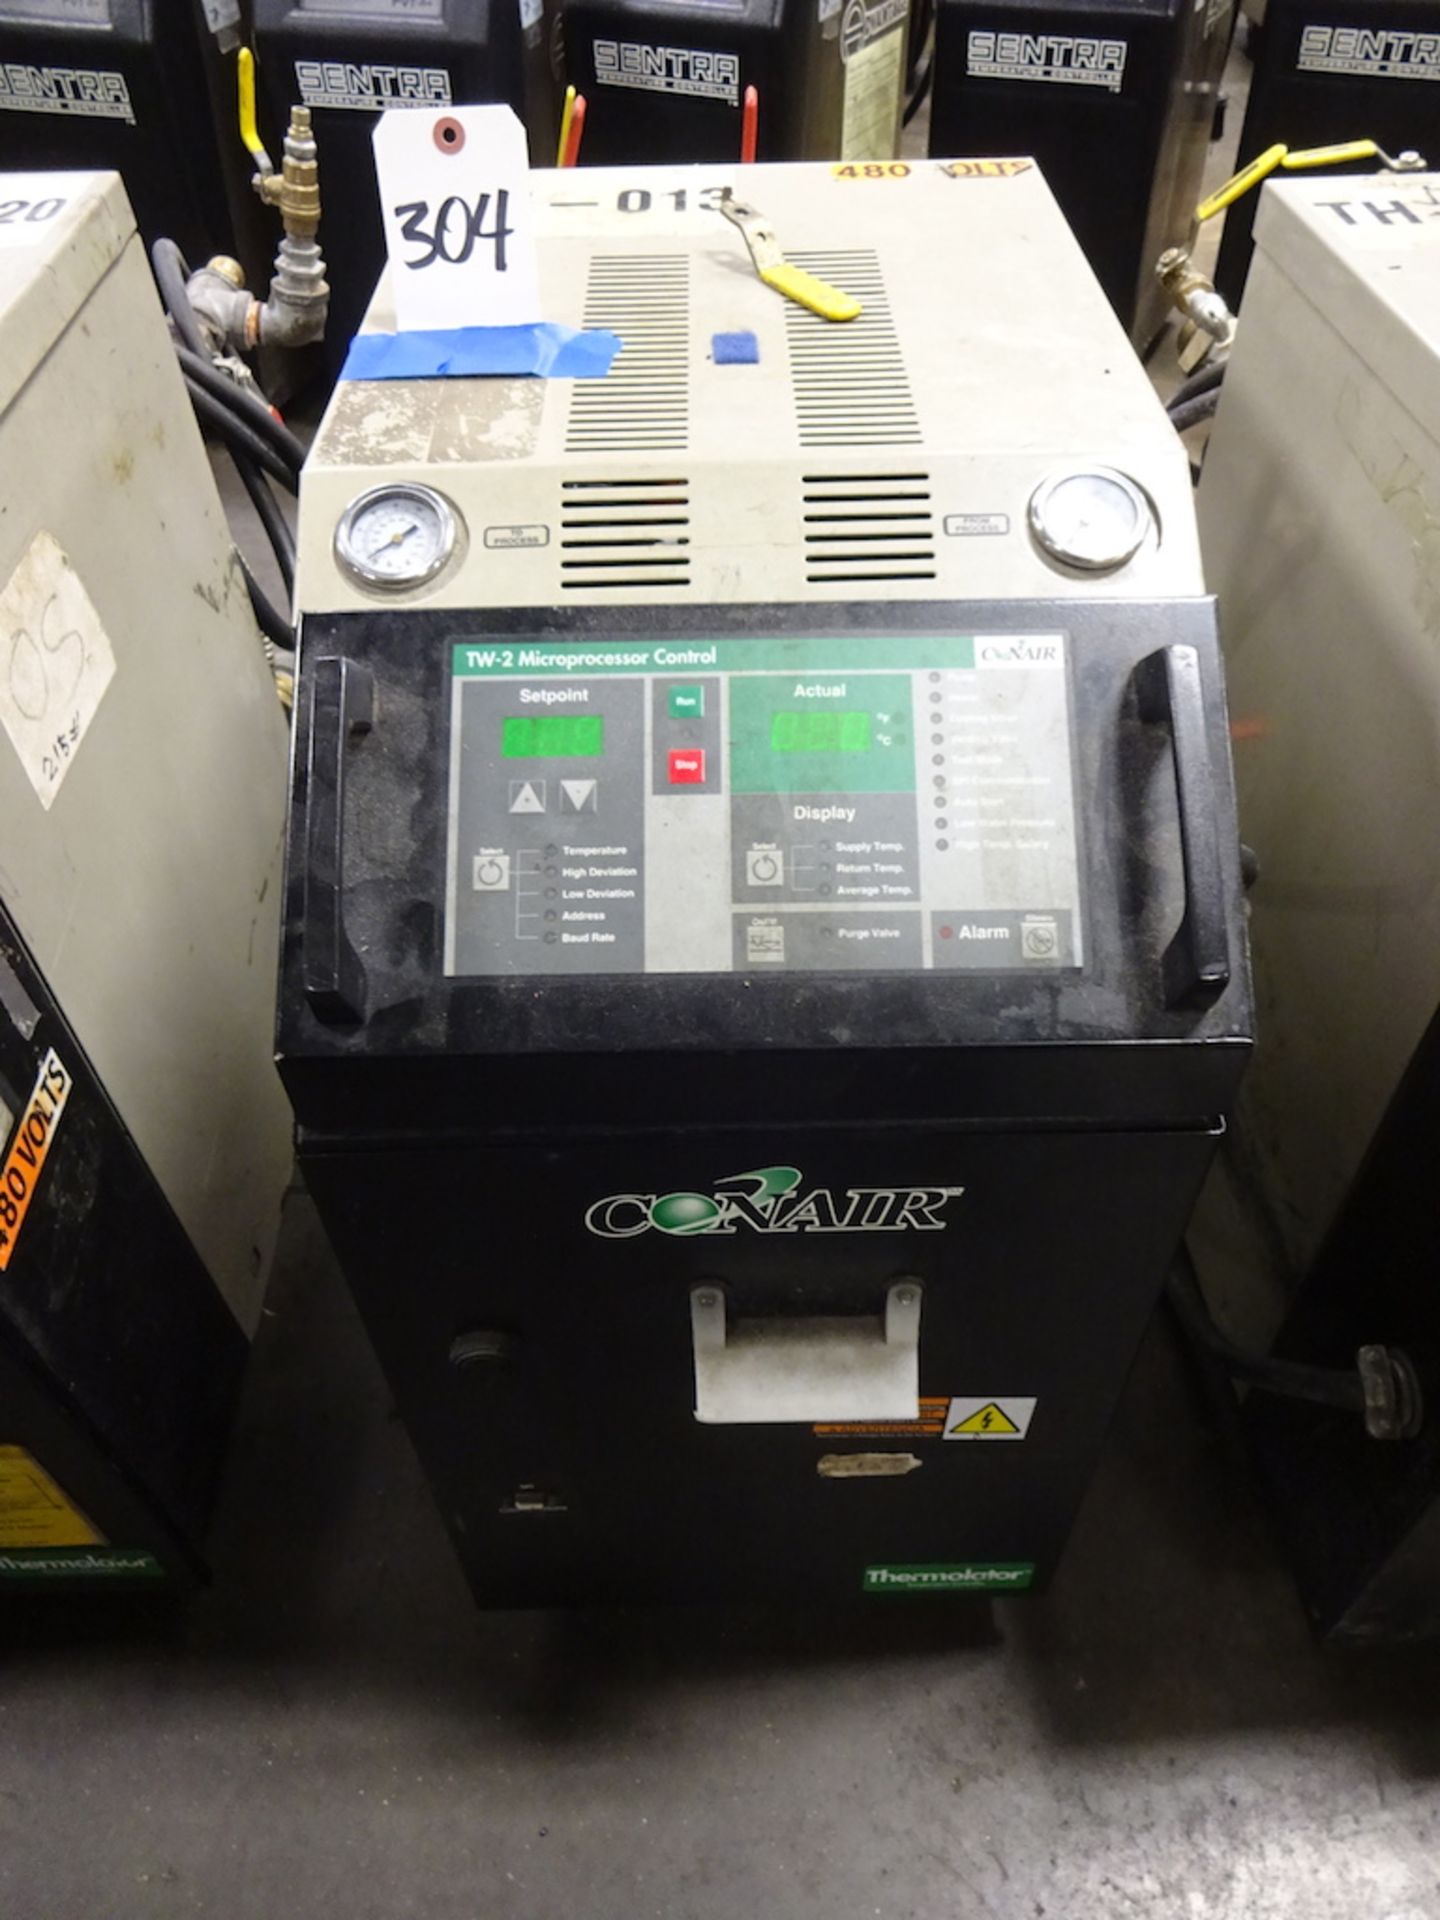 Conair Model TW-2 Thermolator Temperature Controller, S/N 150081, with TW-2 Microprocessor Control